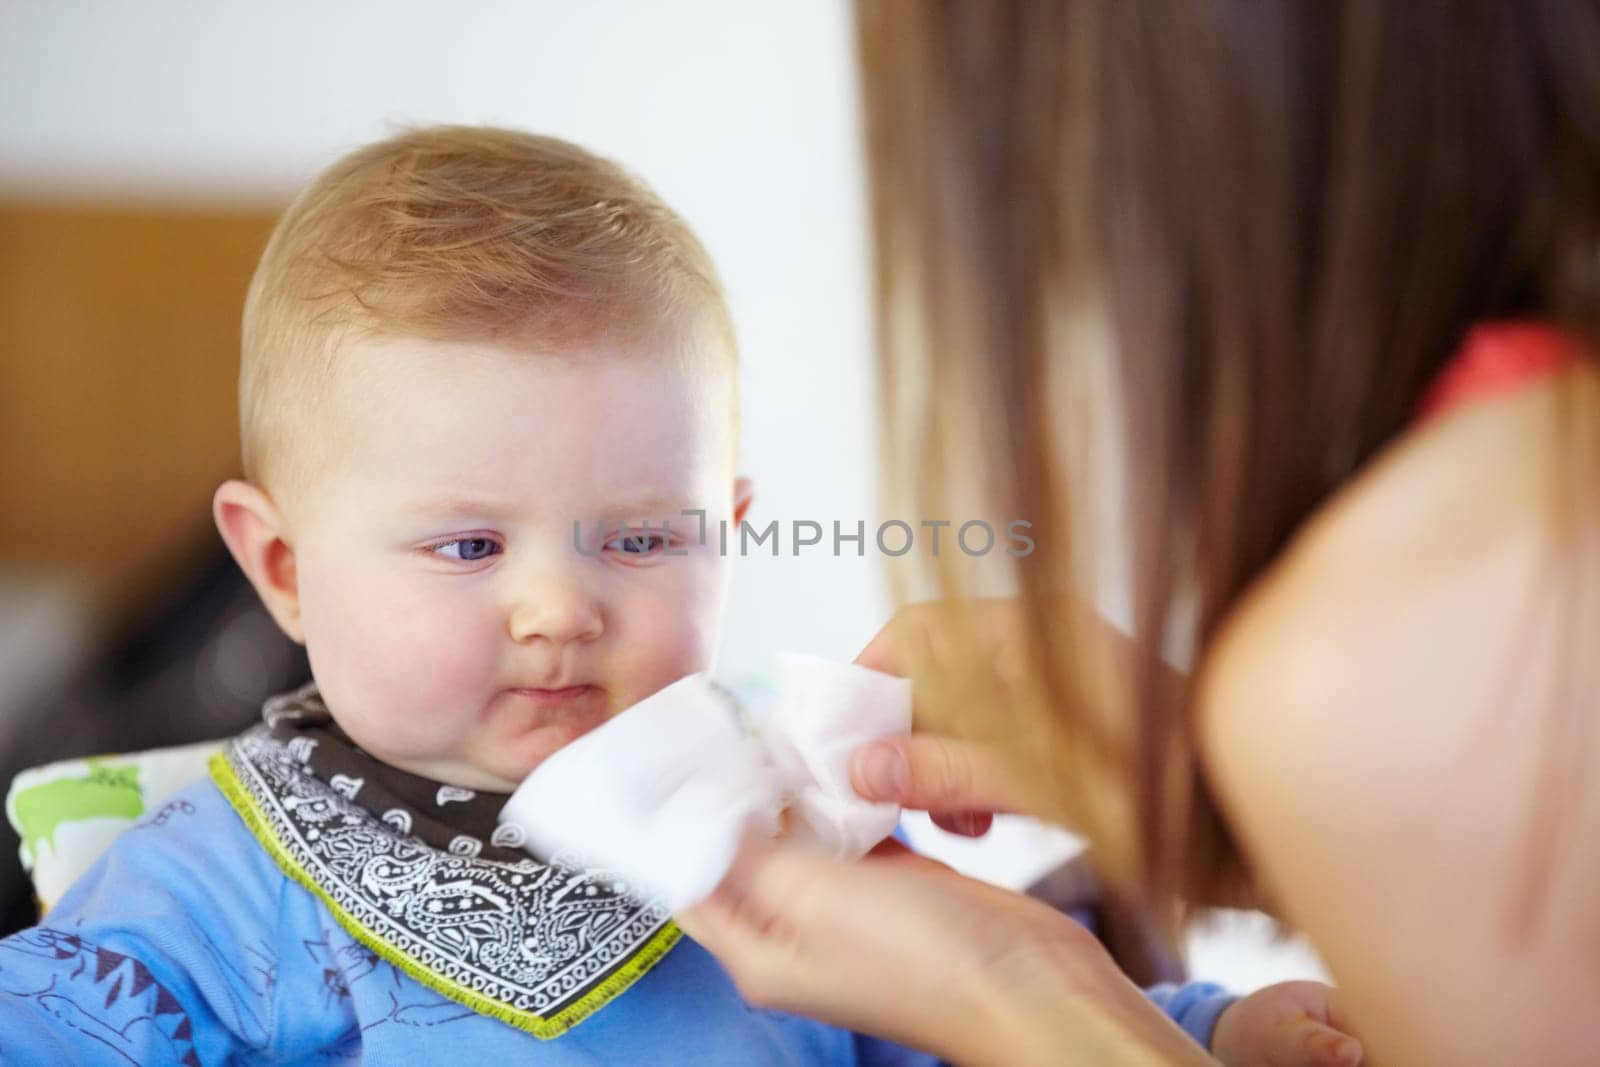 Woman, baby and wipe of mouth for eating, delicious and food for breakfast in kitchen. Little boy, toddler and looking at mother for clean up of yummy, meal or snack for hunger with napkin for mess.